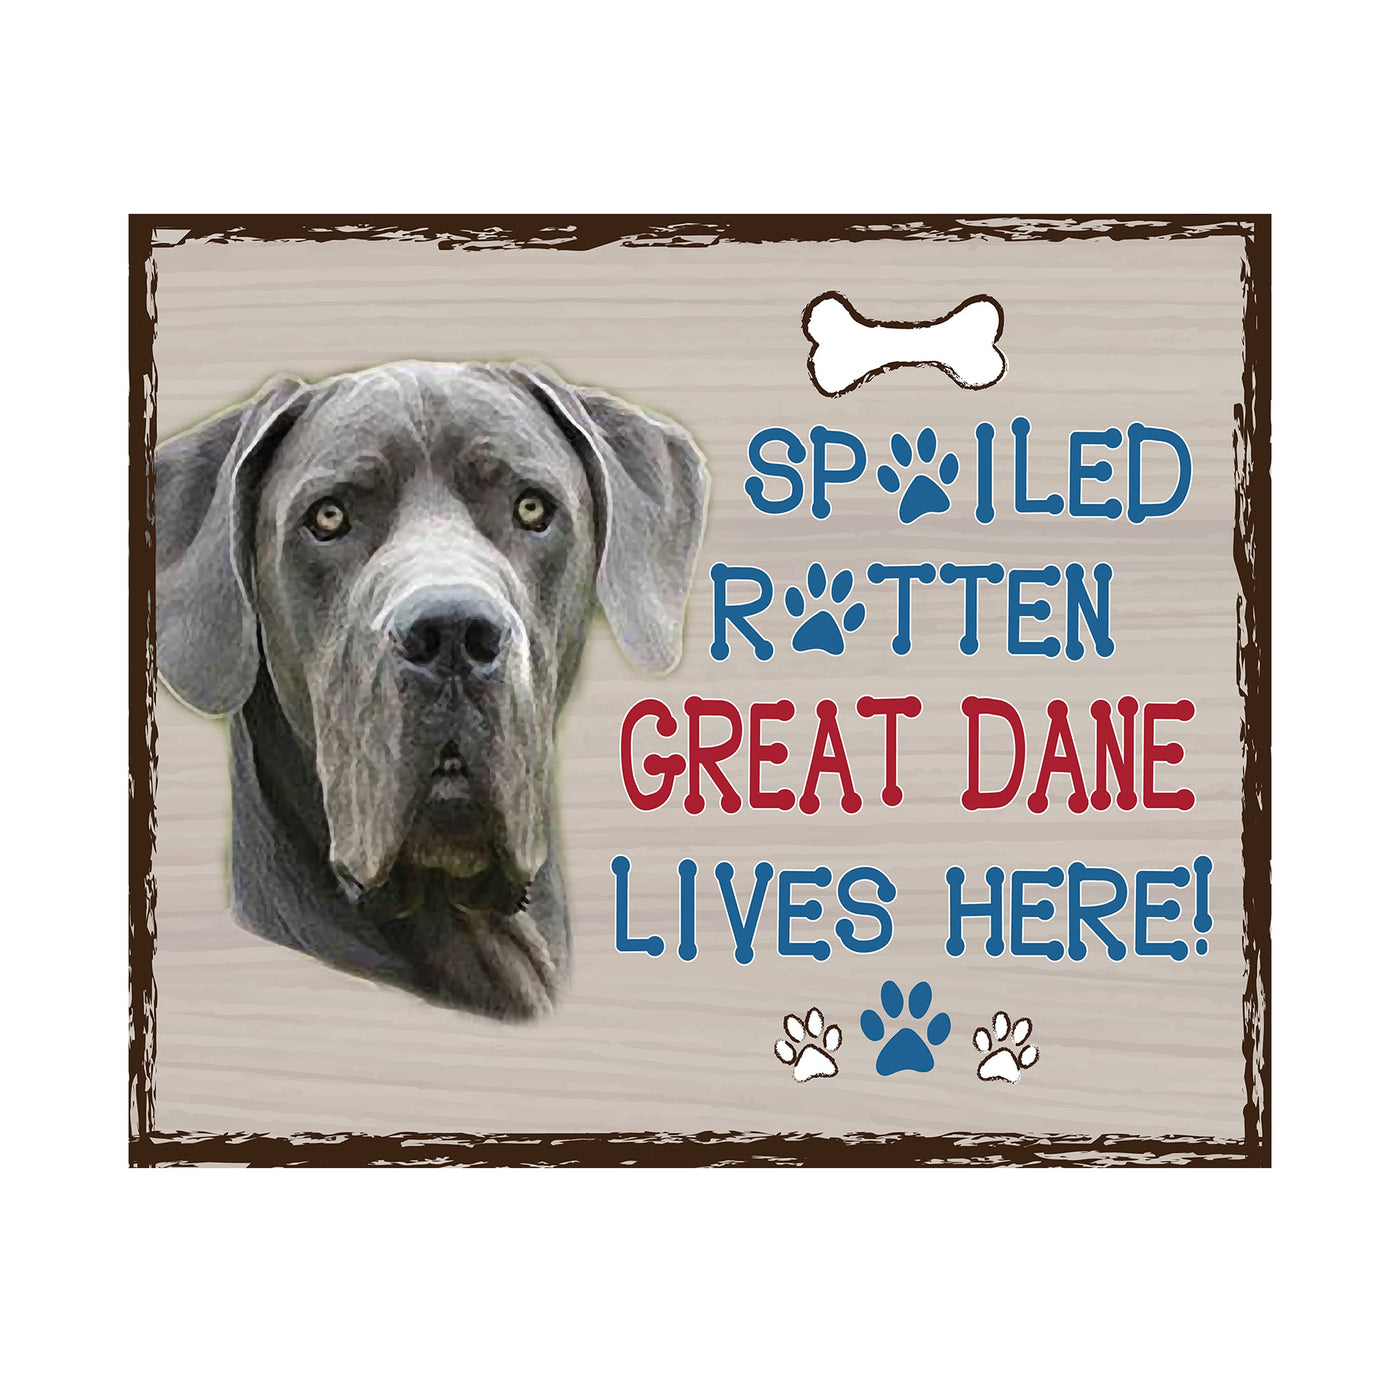 Great Dane-Dog Poster Print-10 x 8" Wall Decor Sign-Ready To Frame."A Spoiled Rotten Great Dane Lives Here". Perfect Pet Wall Art for Home-Kitchen-Cave-Bar-Garage. Great Gift for Great Dane Owners!